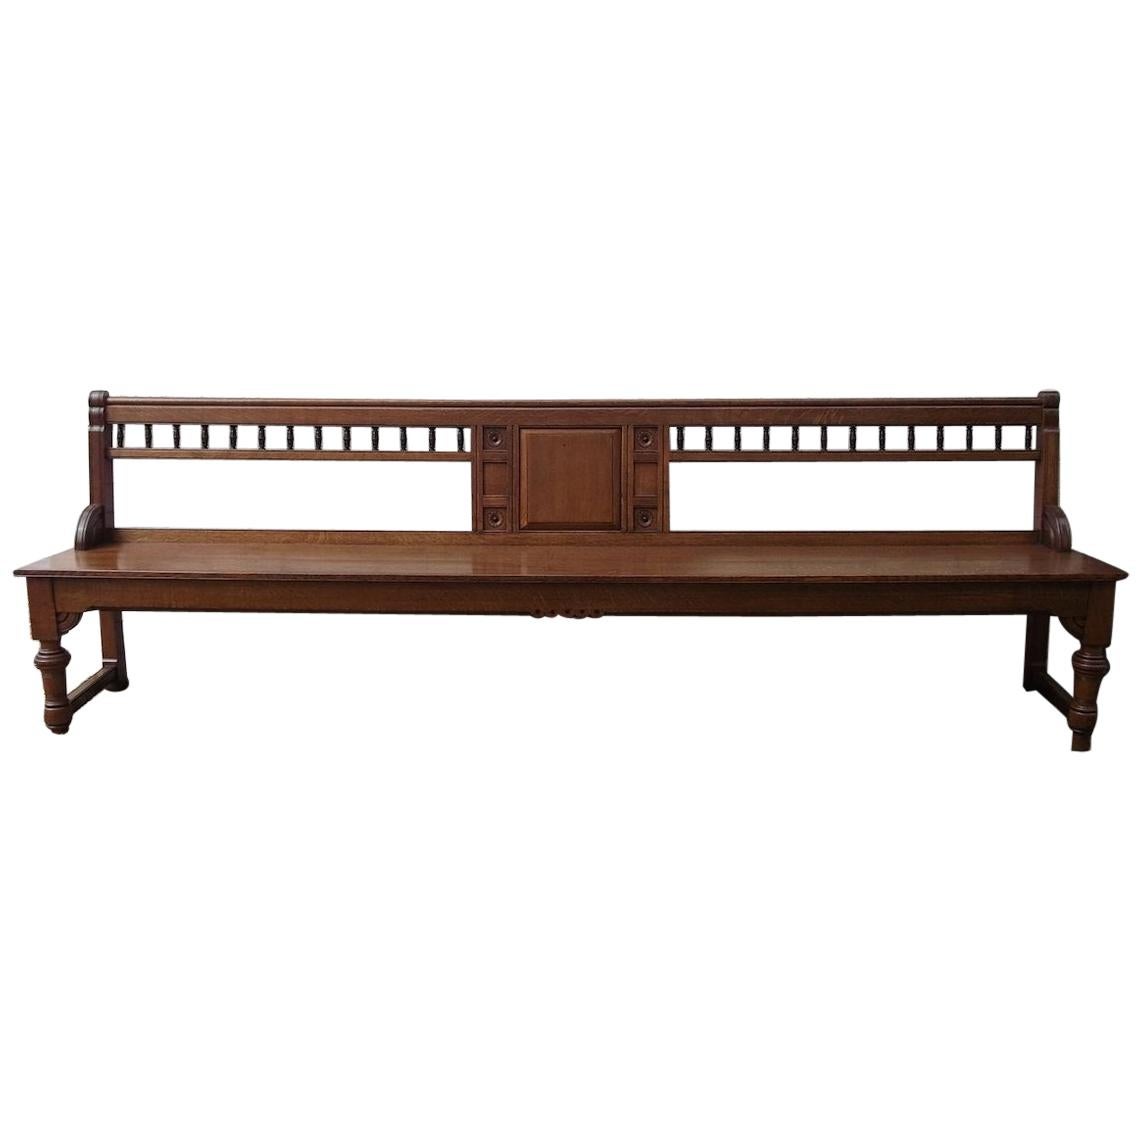 Bruce Talbert, attr, a Long Aesthetic Movement Oak Bench with Carved Florets